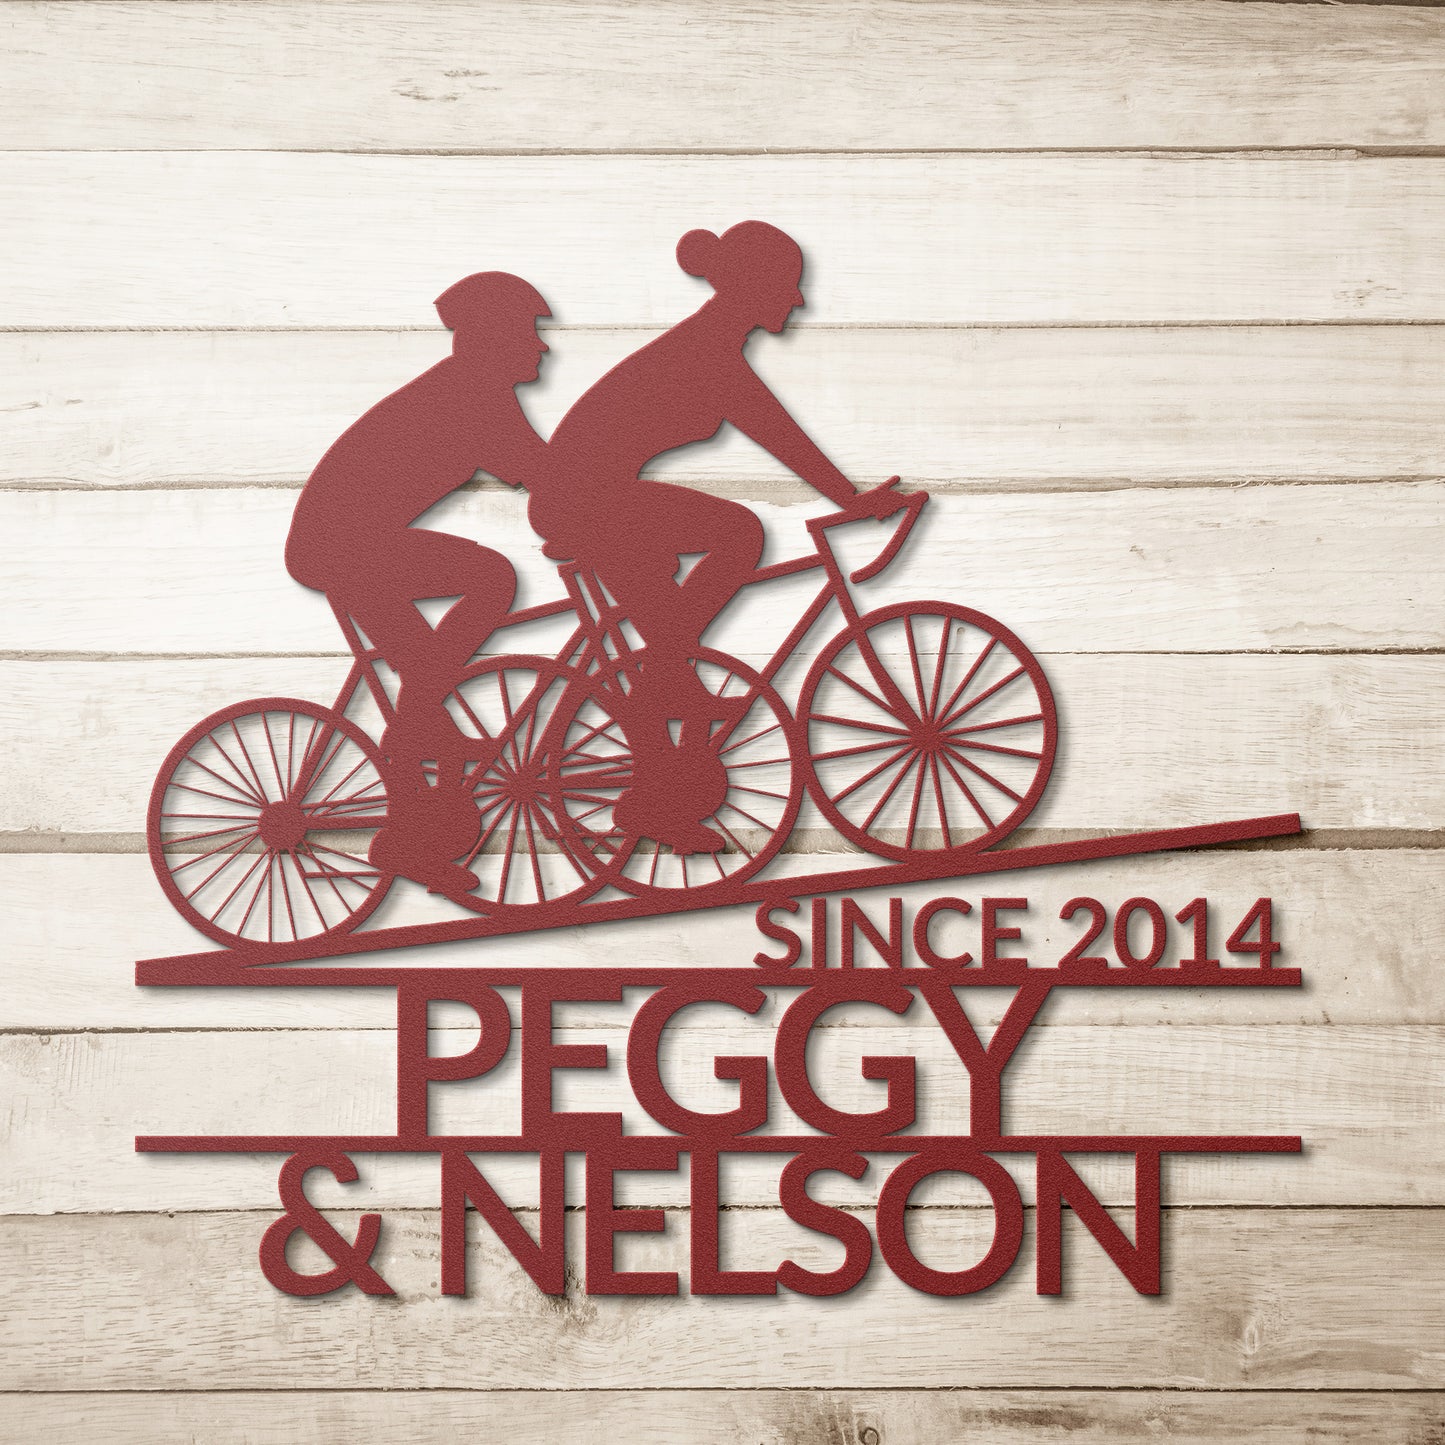 teelaunch's Personalized Couple Cycling Uphill Metal Wall Art Sign is ideal for couples who love to cycle together. This unique sign features the names and year established of Peggy and Nelson.